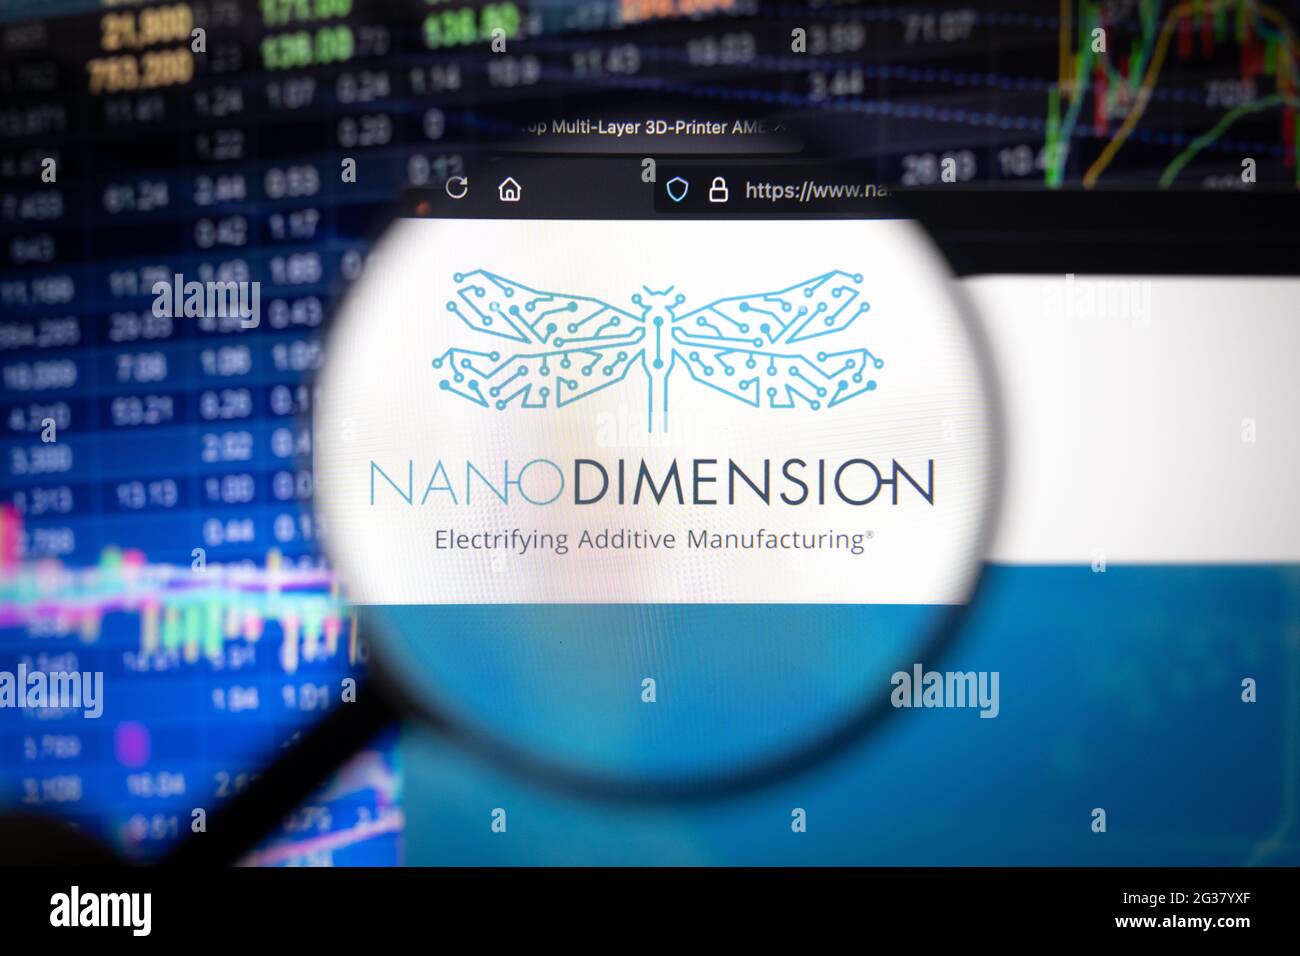 Nano Dimension company logo on a website with blurry stock market developments in the background, seen on a computer screen through a magnifying glass Stock Photo